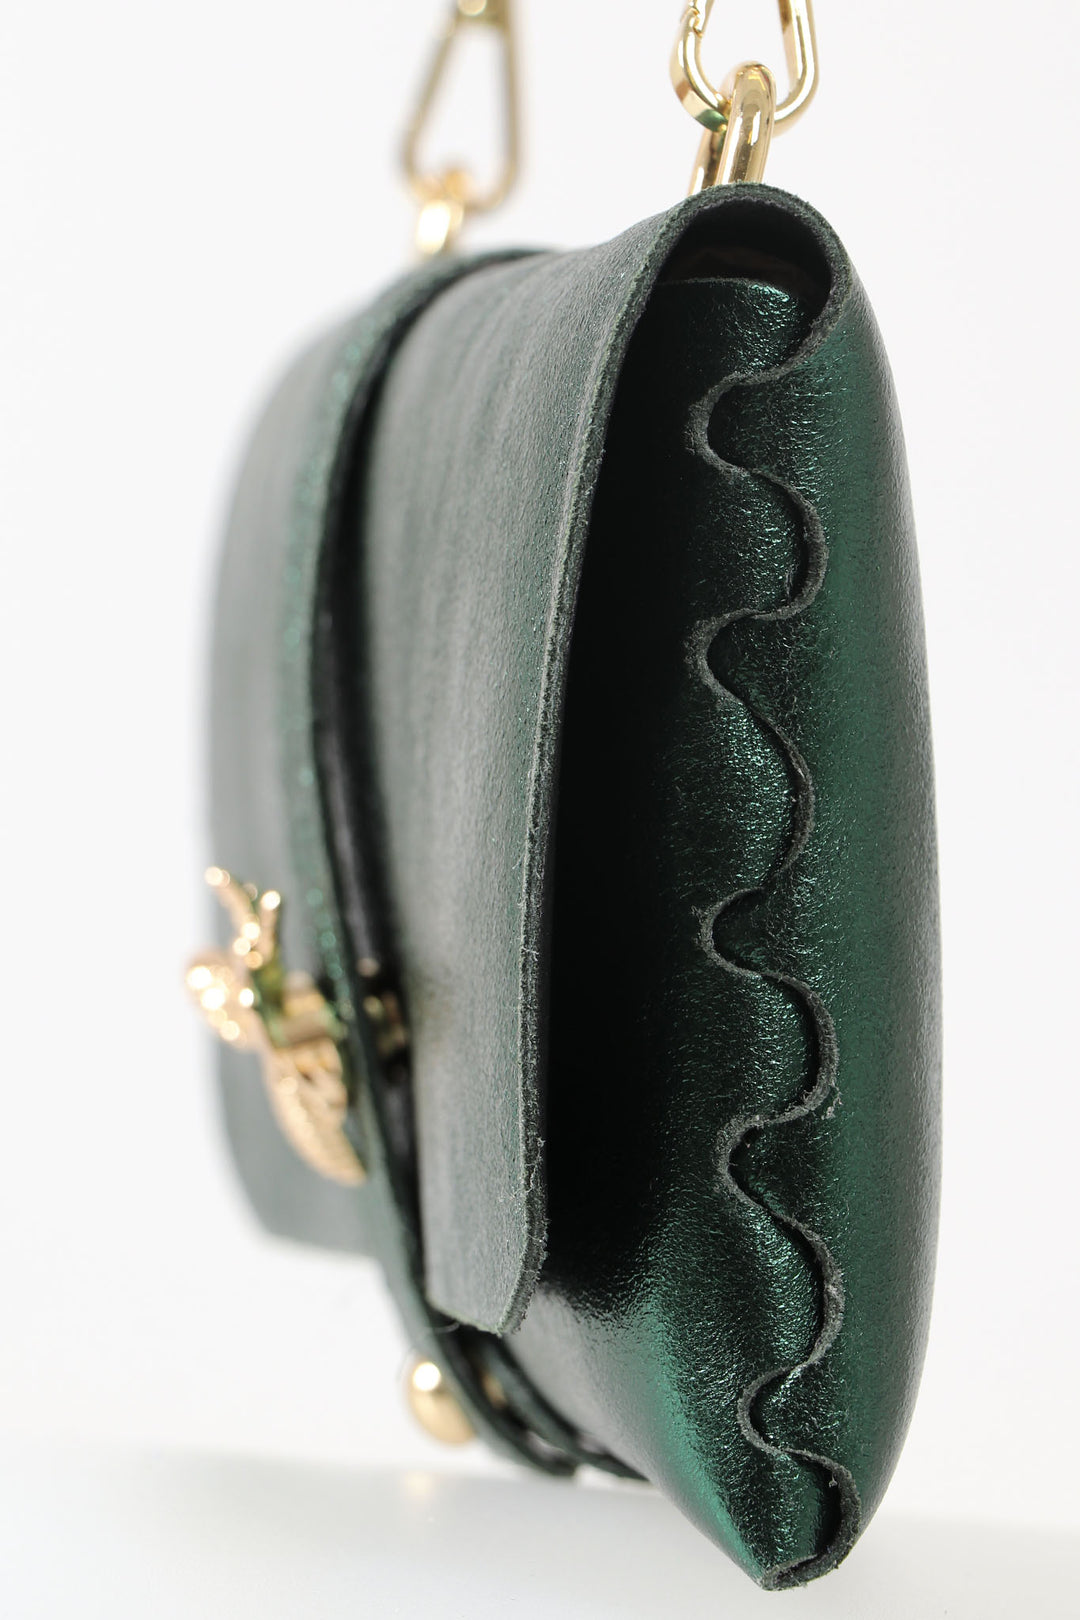 Emerald Green Bee Emblem Genuine Italian Leather Clutch Bag with Gold Chain Strap